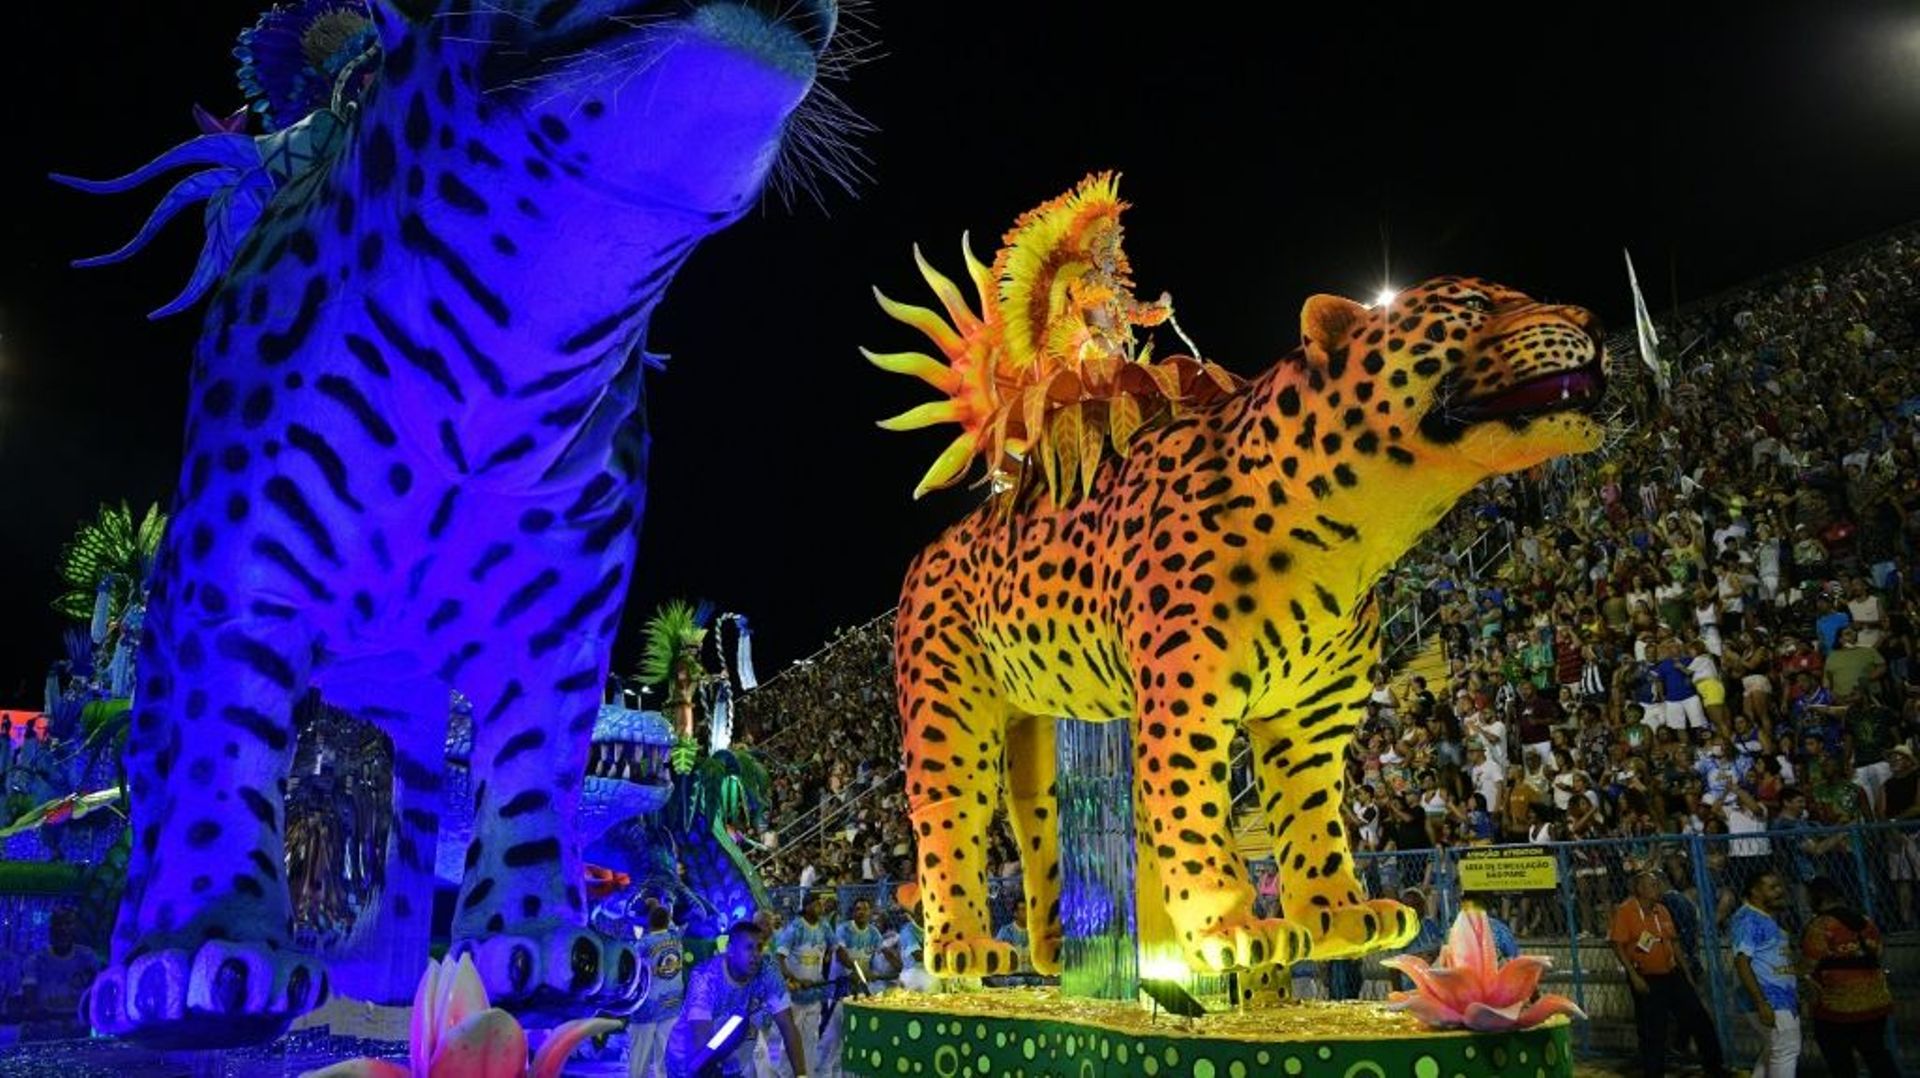 From Mardi Gras to Rio's carnival, here's how the world celebrates